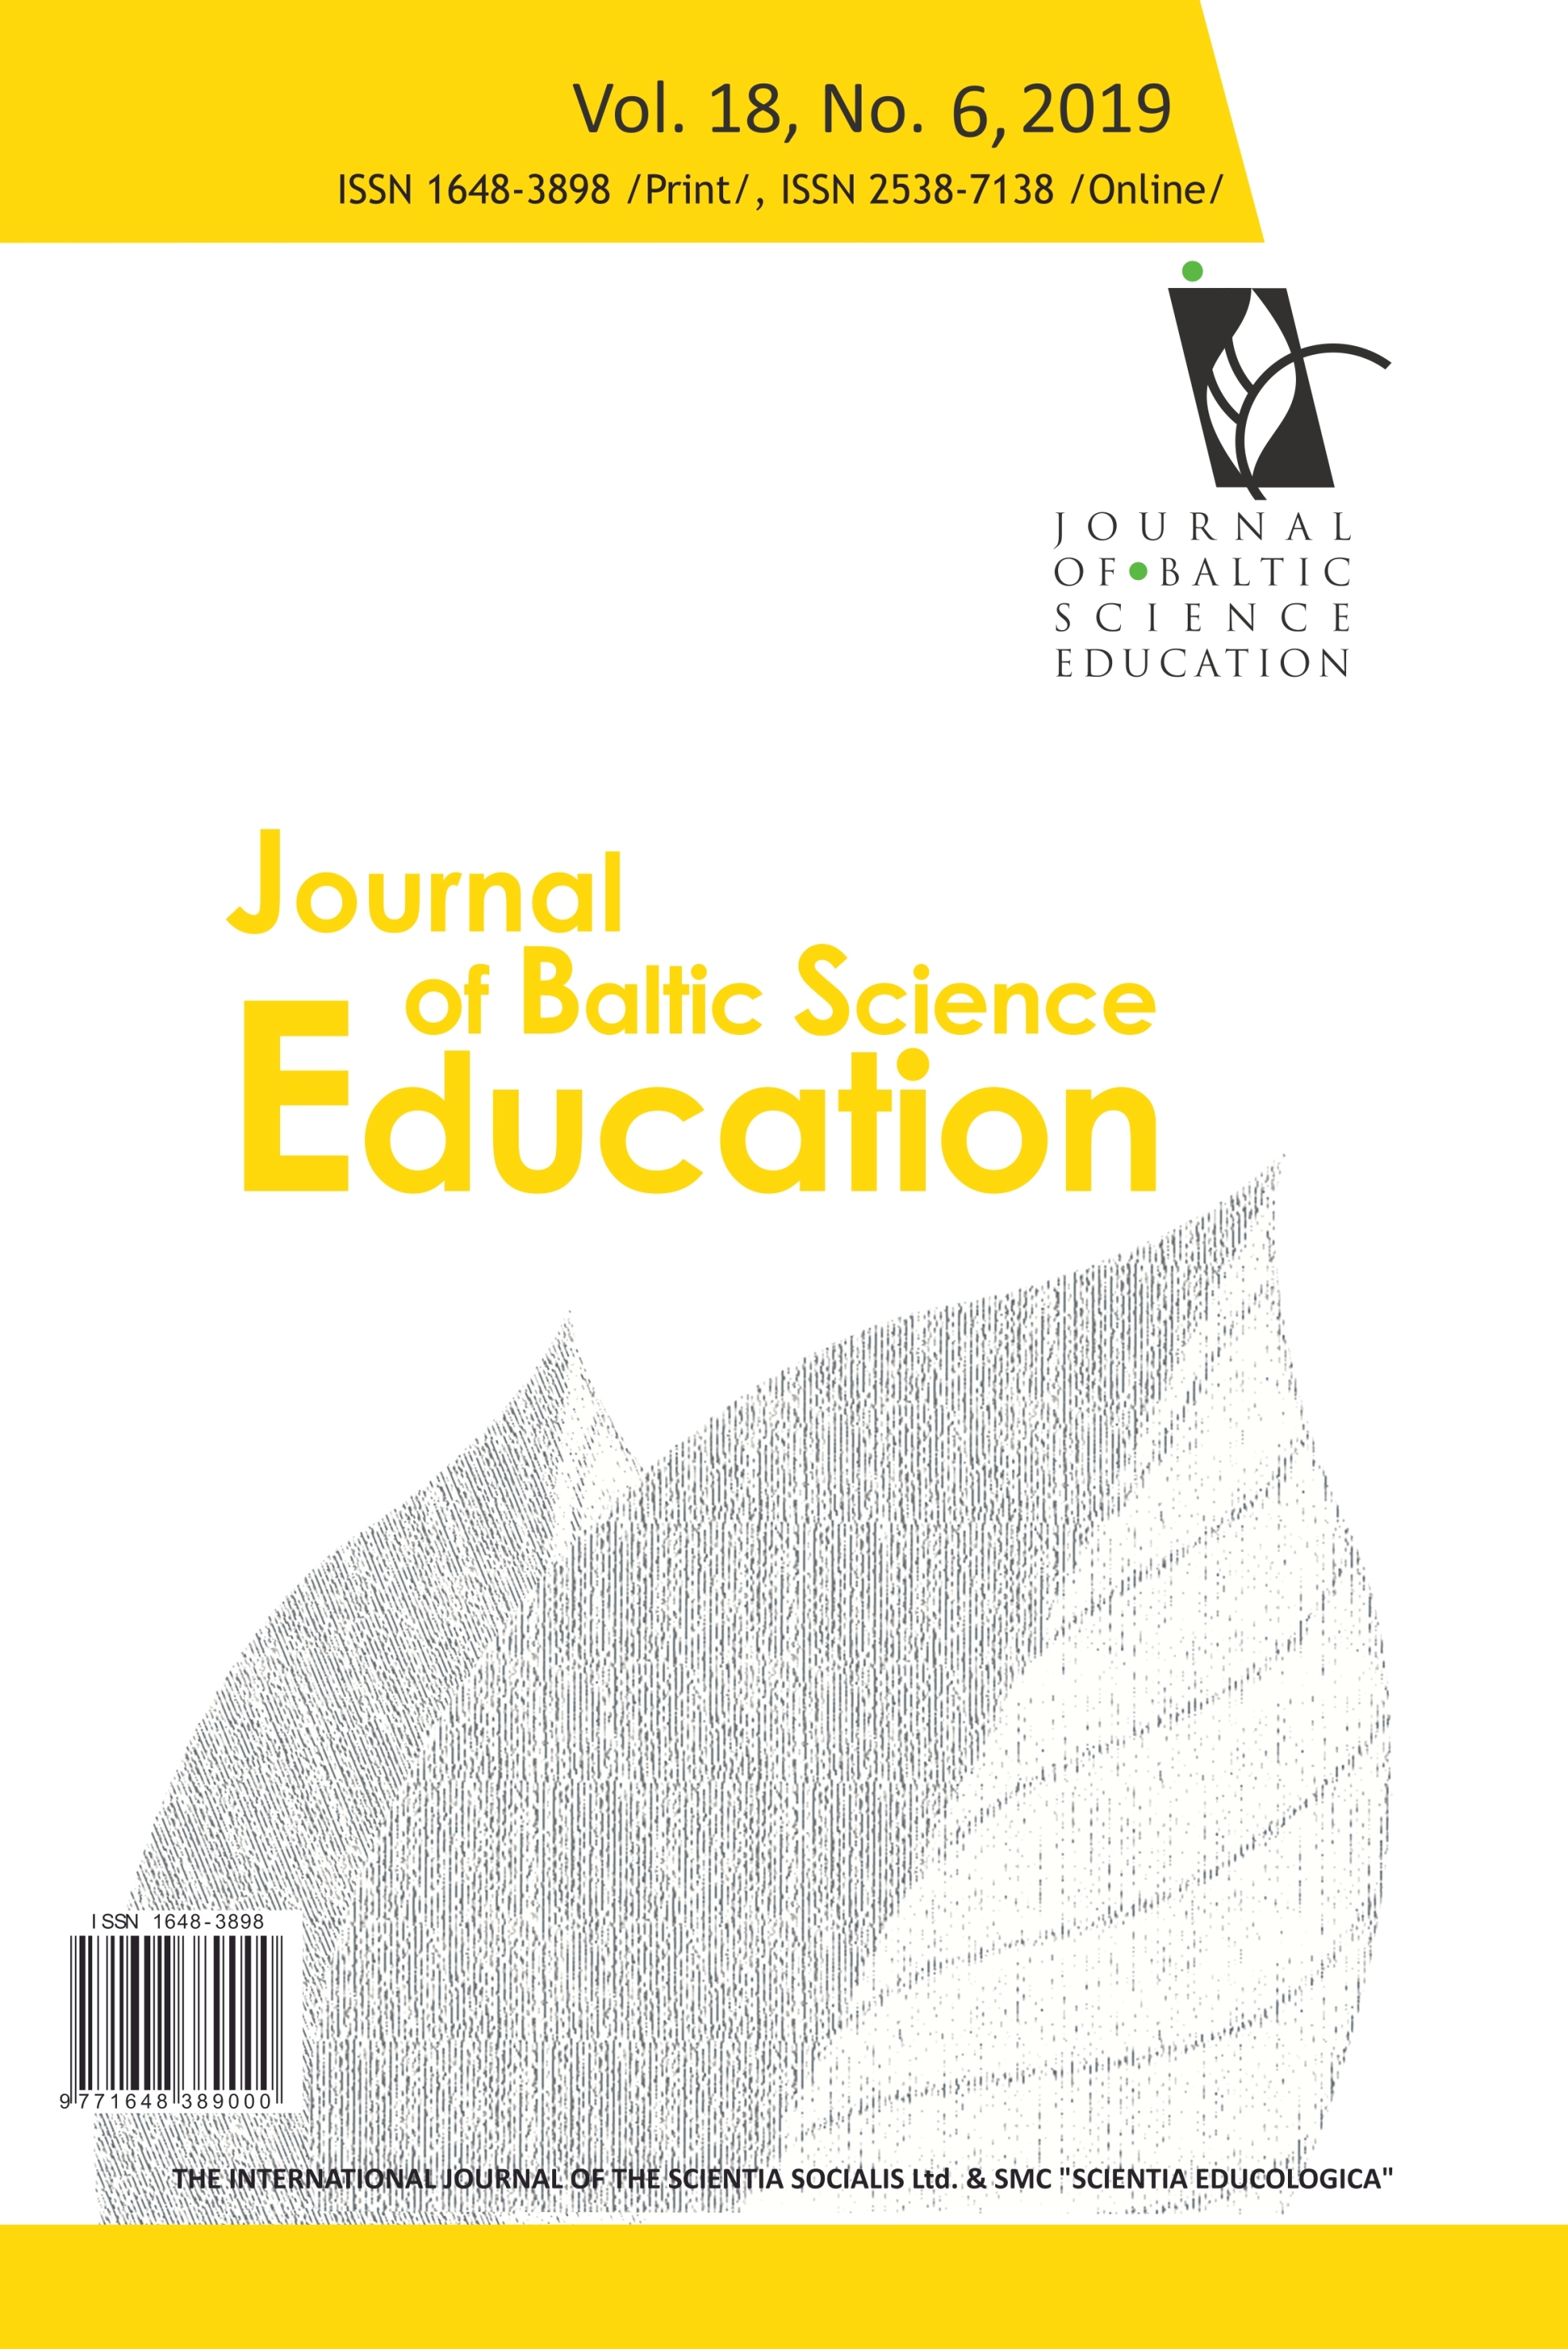 THE IMPACTS OF A MARINE SCIENCE BOARD GAME ON MOTIVATION, INTEREST, AND ACHIEVEMENT IN MARINE SCIENCE LEARNING Cover Image